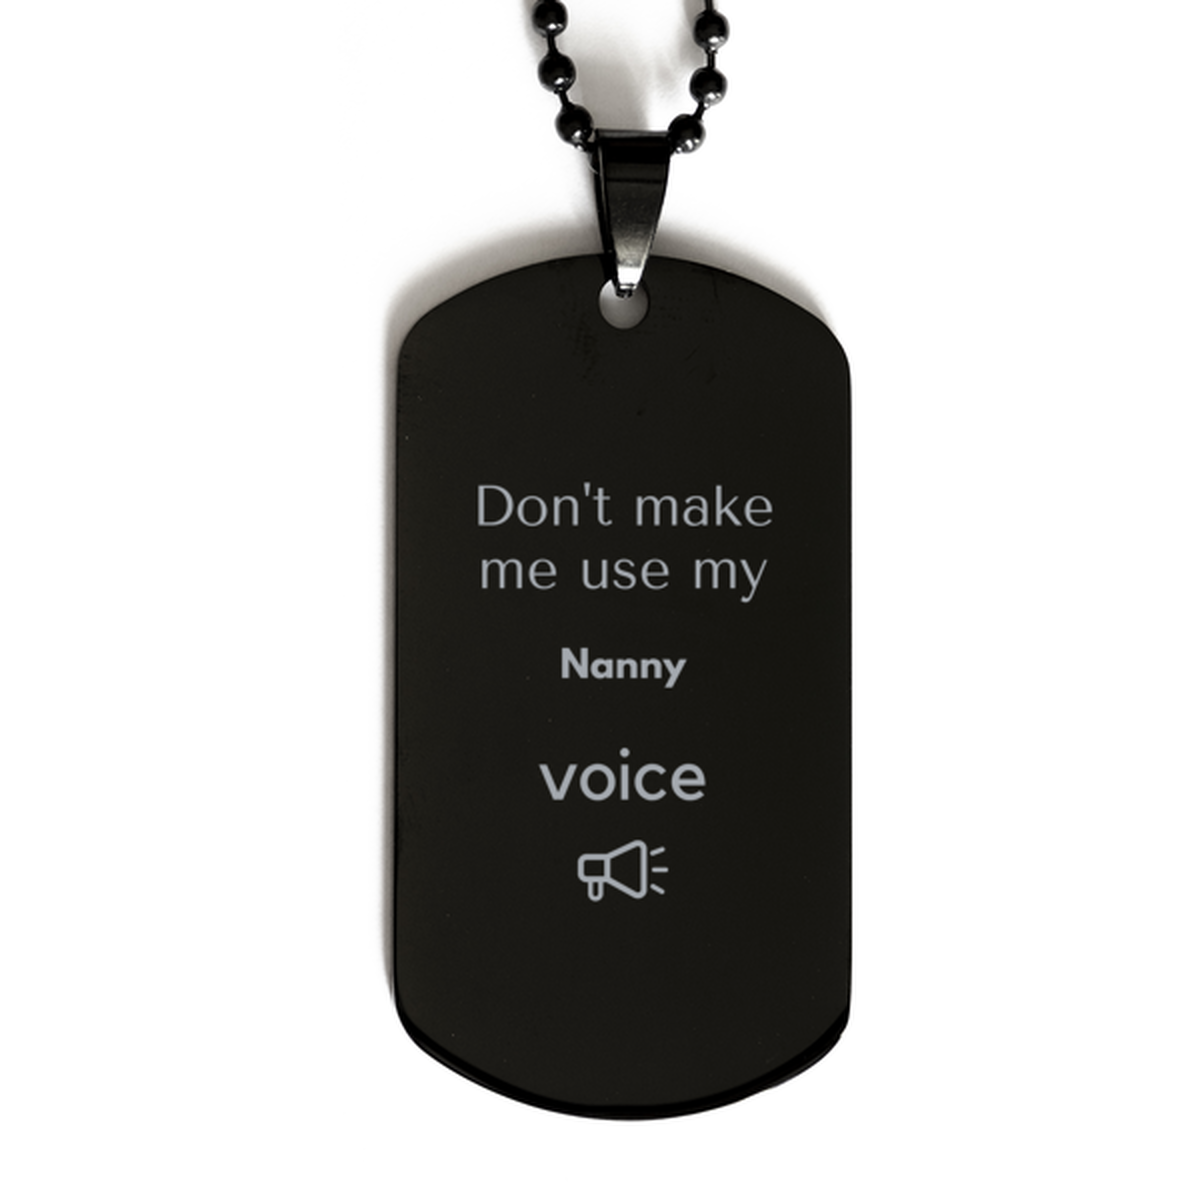 Don't make me use my Nanny voice, Sarcasm Nanny Gifts, Christmas Nanny Black Dog Tag Birthday Unique Gifts For Nanny Coworkers, Men, Women, Colleague, Friends